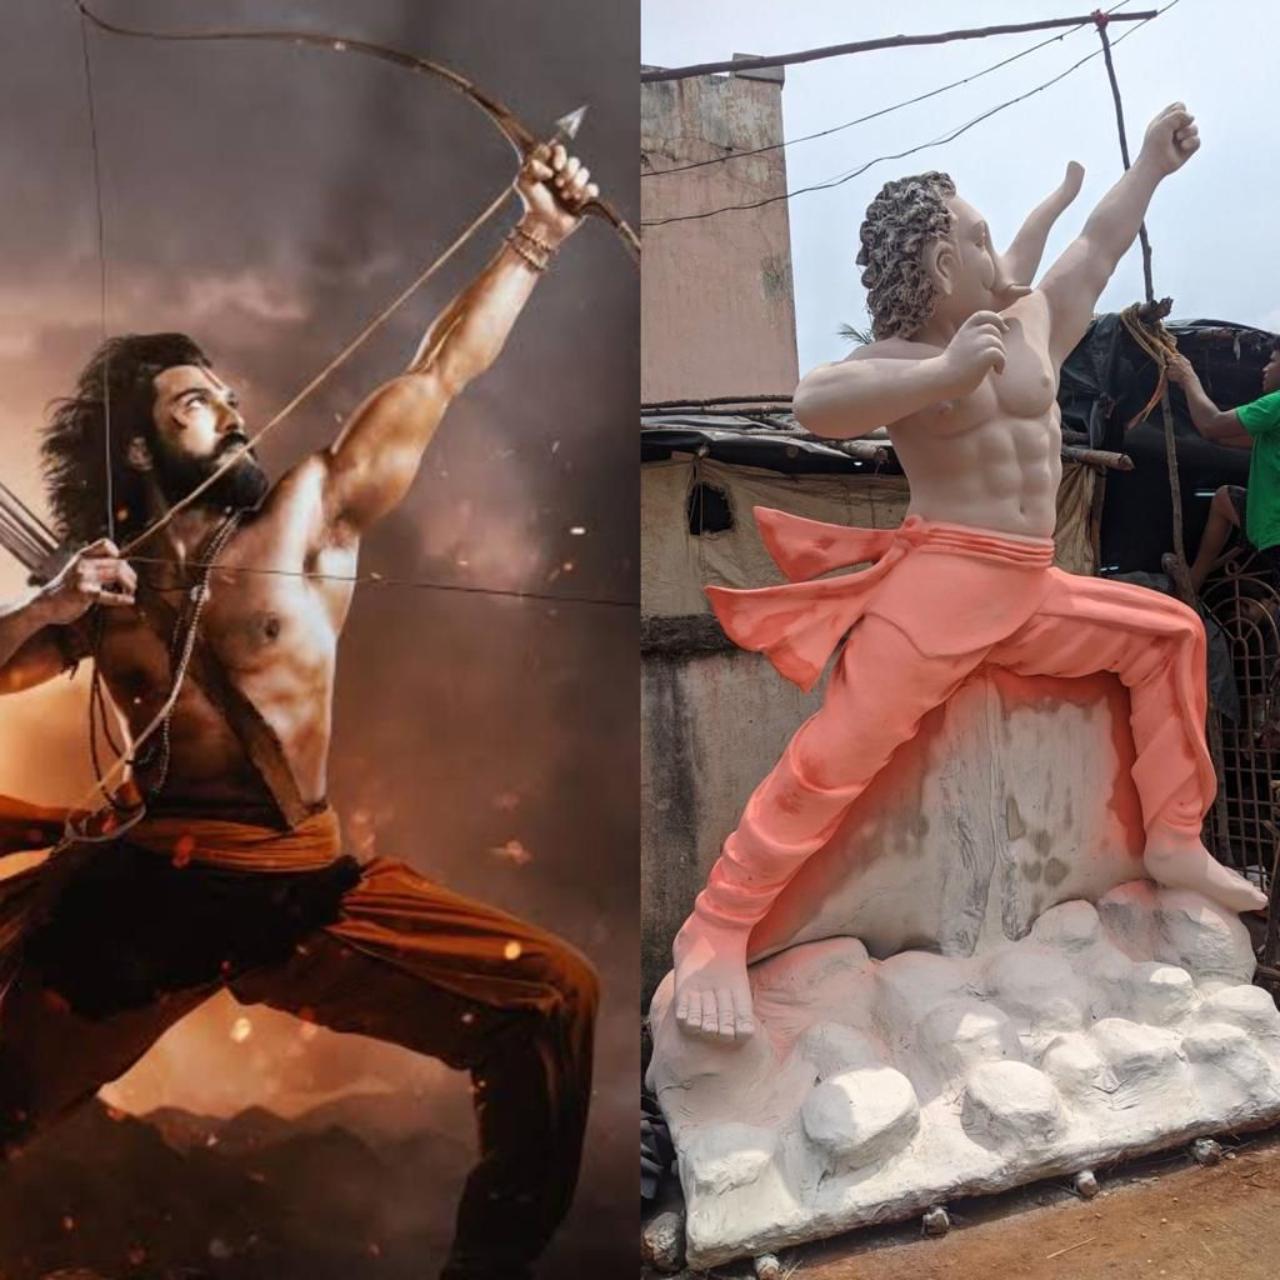 Ram Charan's RRR character, however, seem to have a larger craze this festive season. Sculptures in various poses of his character's warrior pose have been inspirational for sculptors this season